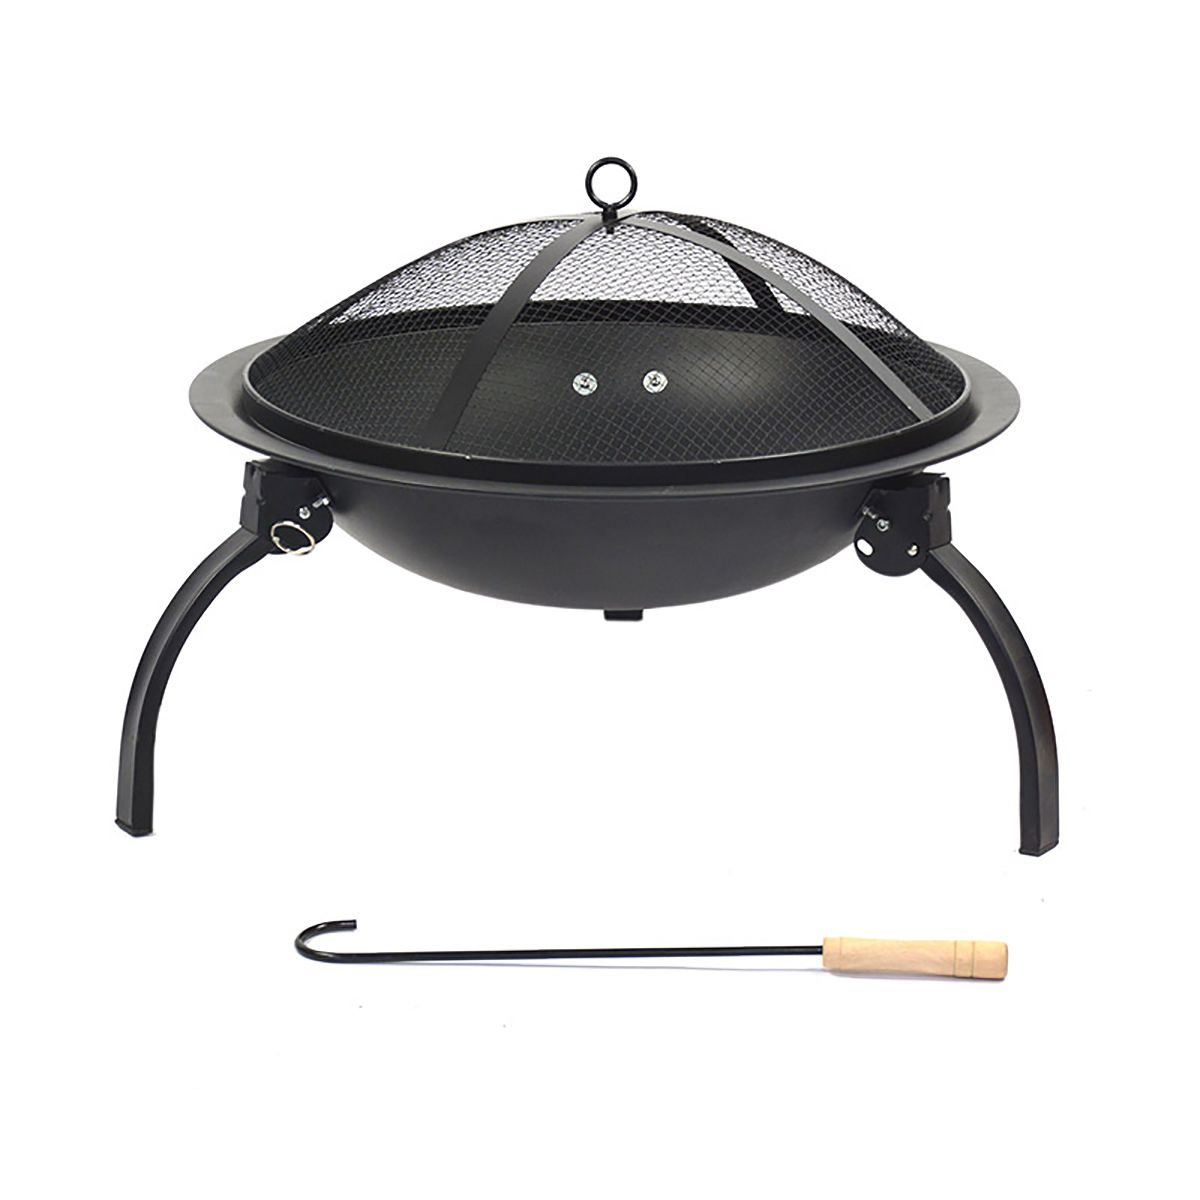 55cm-Outdoor-Fire-Pit-Garden-Patio-Wood-Log-Burner-BBQ-Camping-Brazier-Stove-1733717